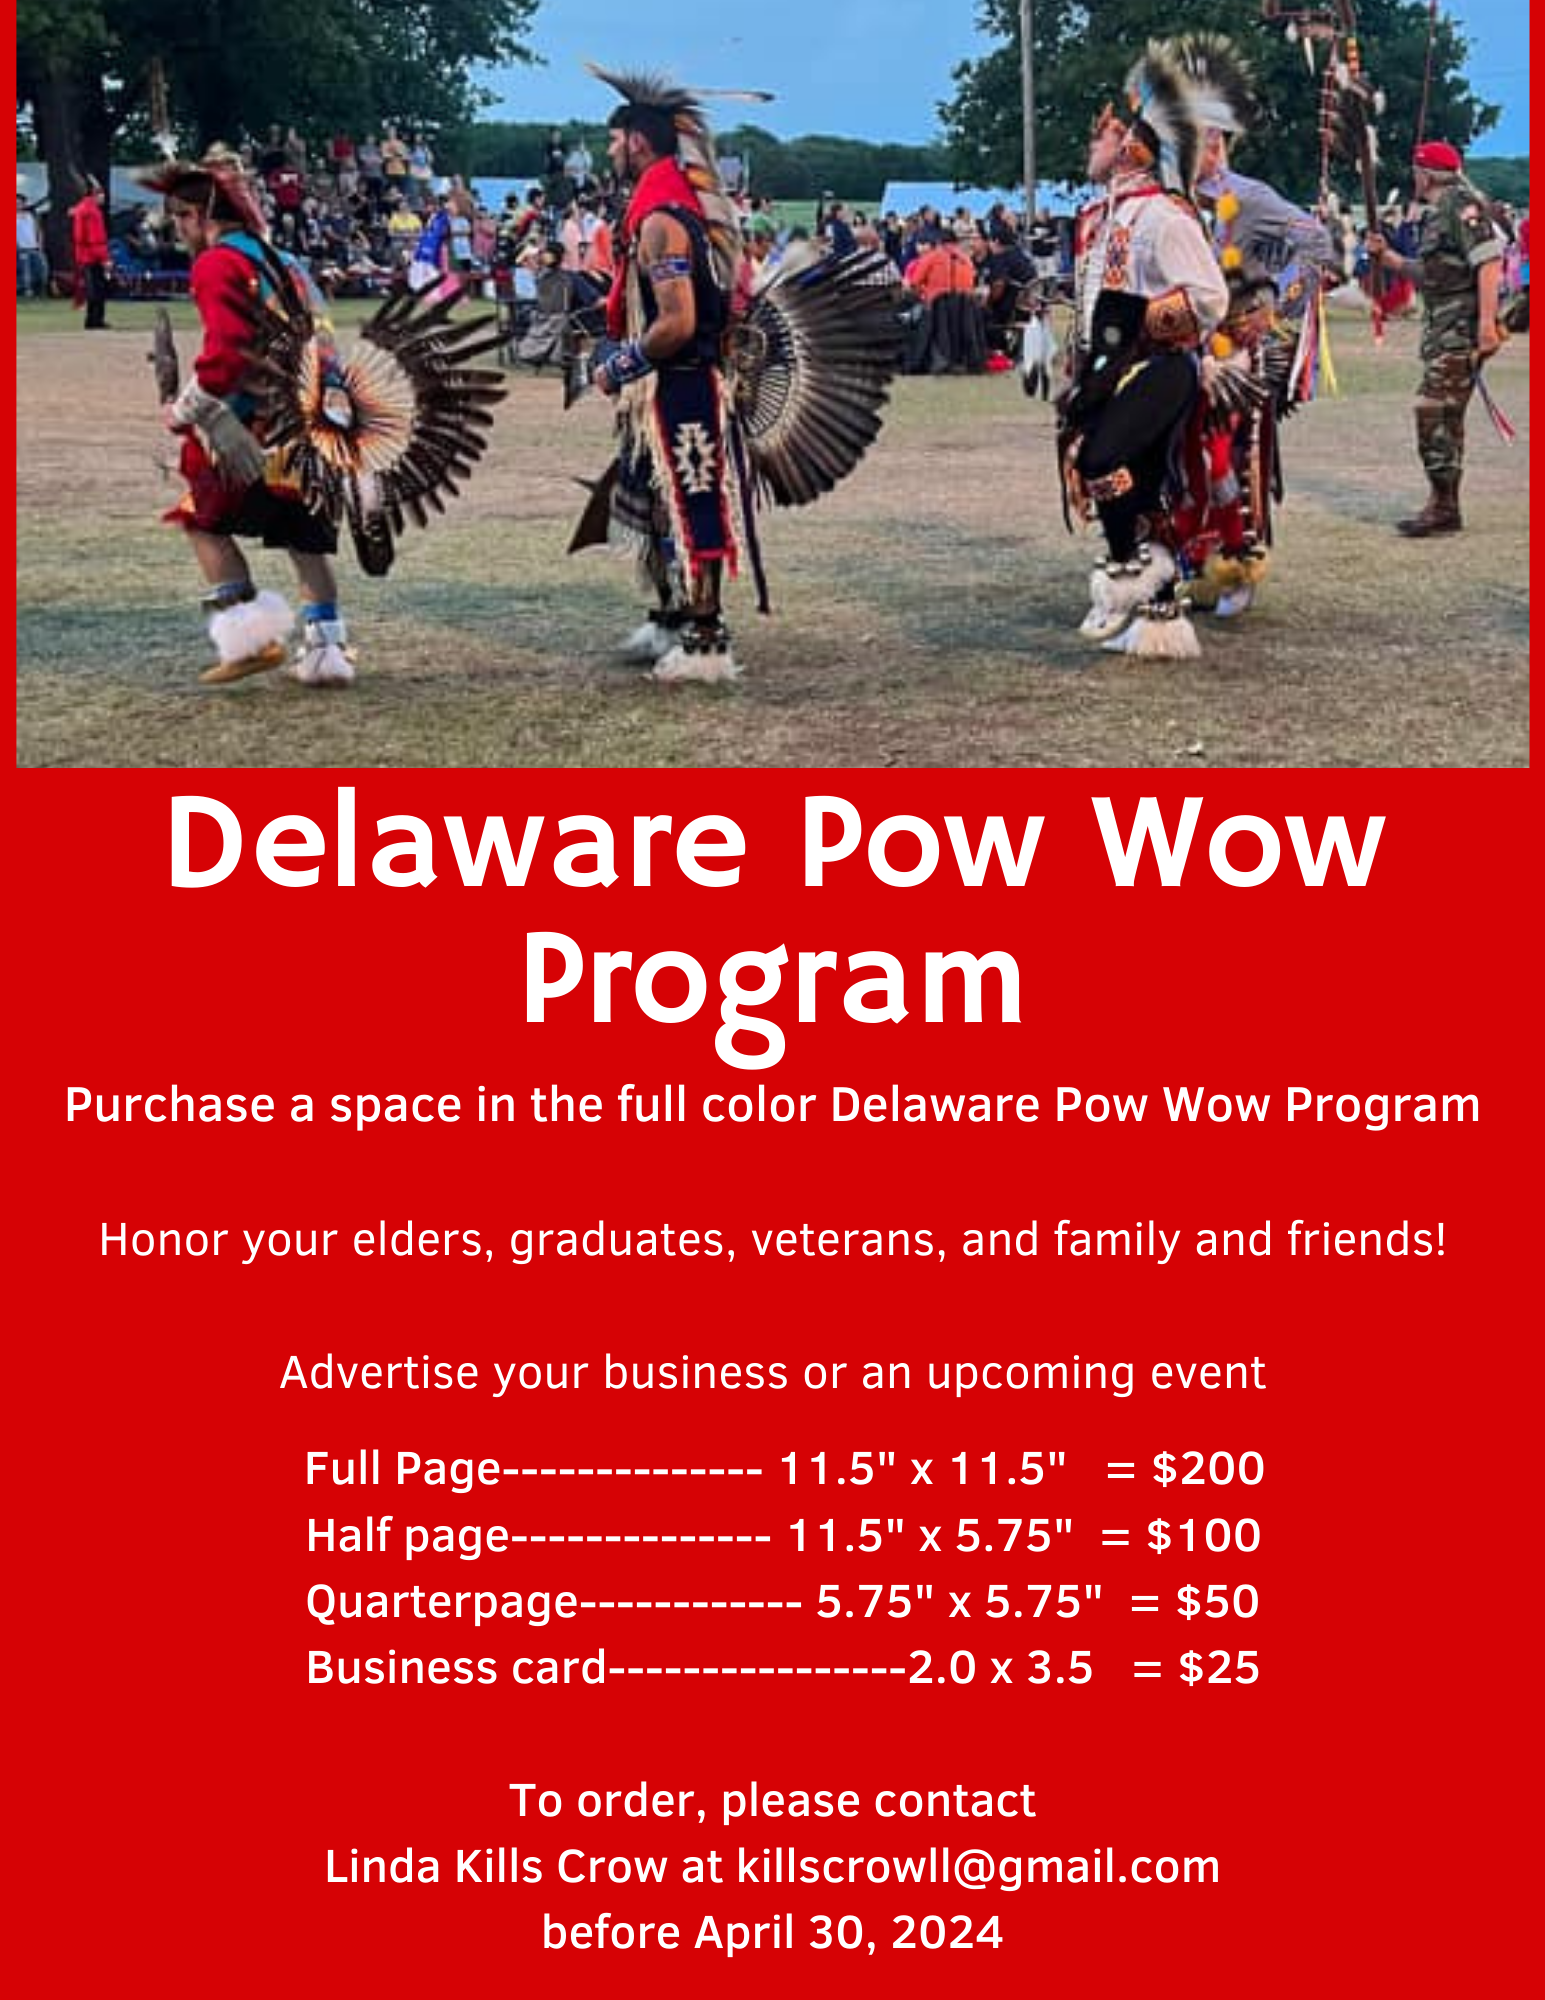 Purchase a space in the full color Delaware Pow Wow Program. Honor your elders, graduates, veterans, and family and friends! Advertise your business or an upcoming event.

Full page (11.5